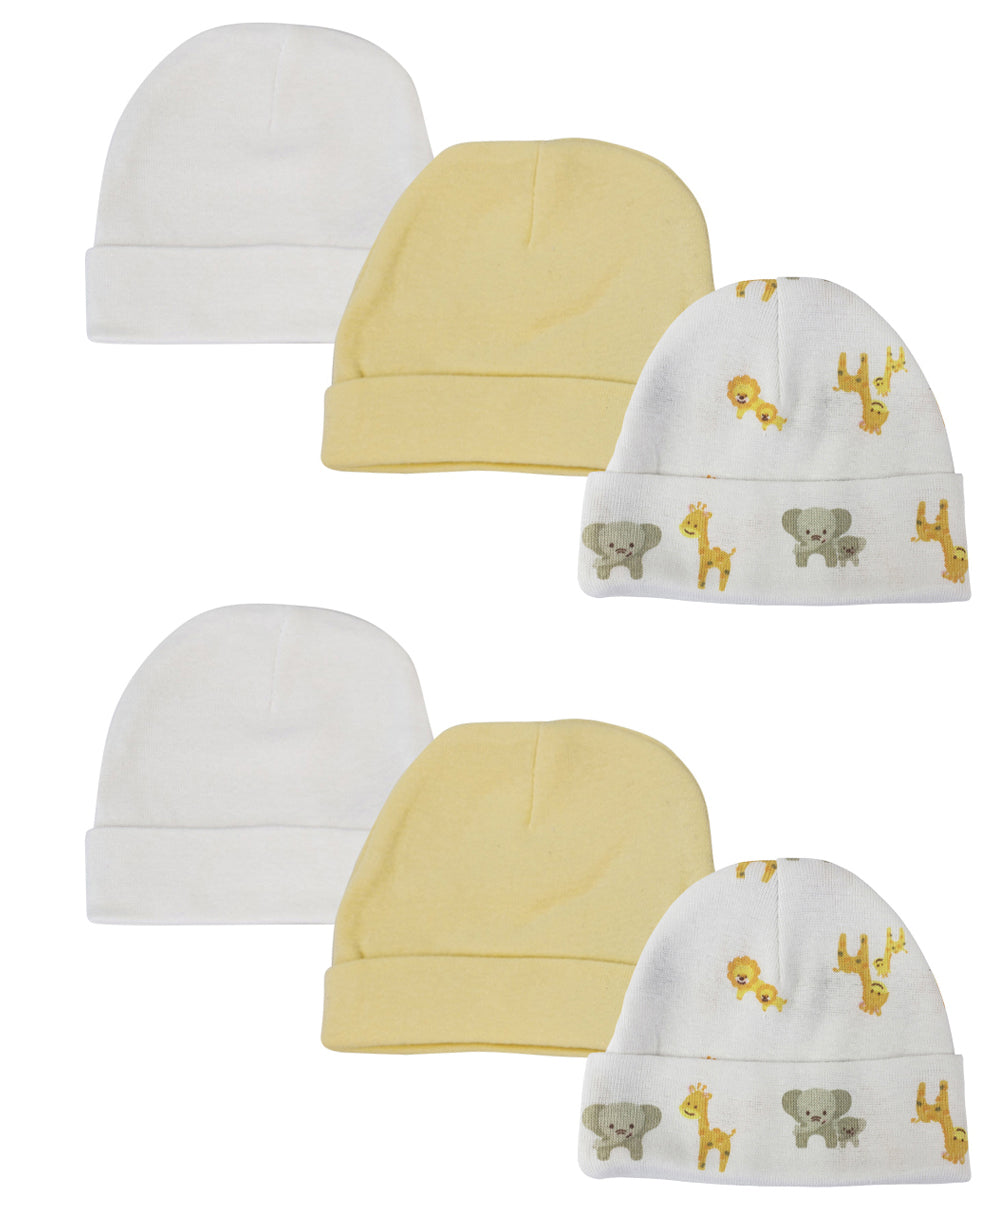 Baby Boy, Baby Girl, Unisex Infant Caps (Pack of 6) NC_0388